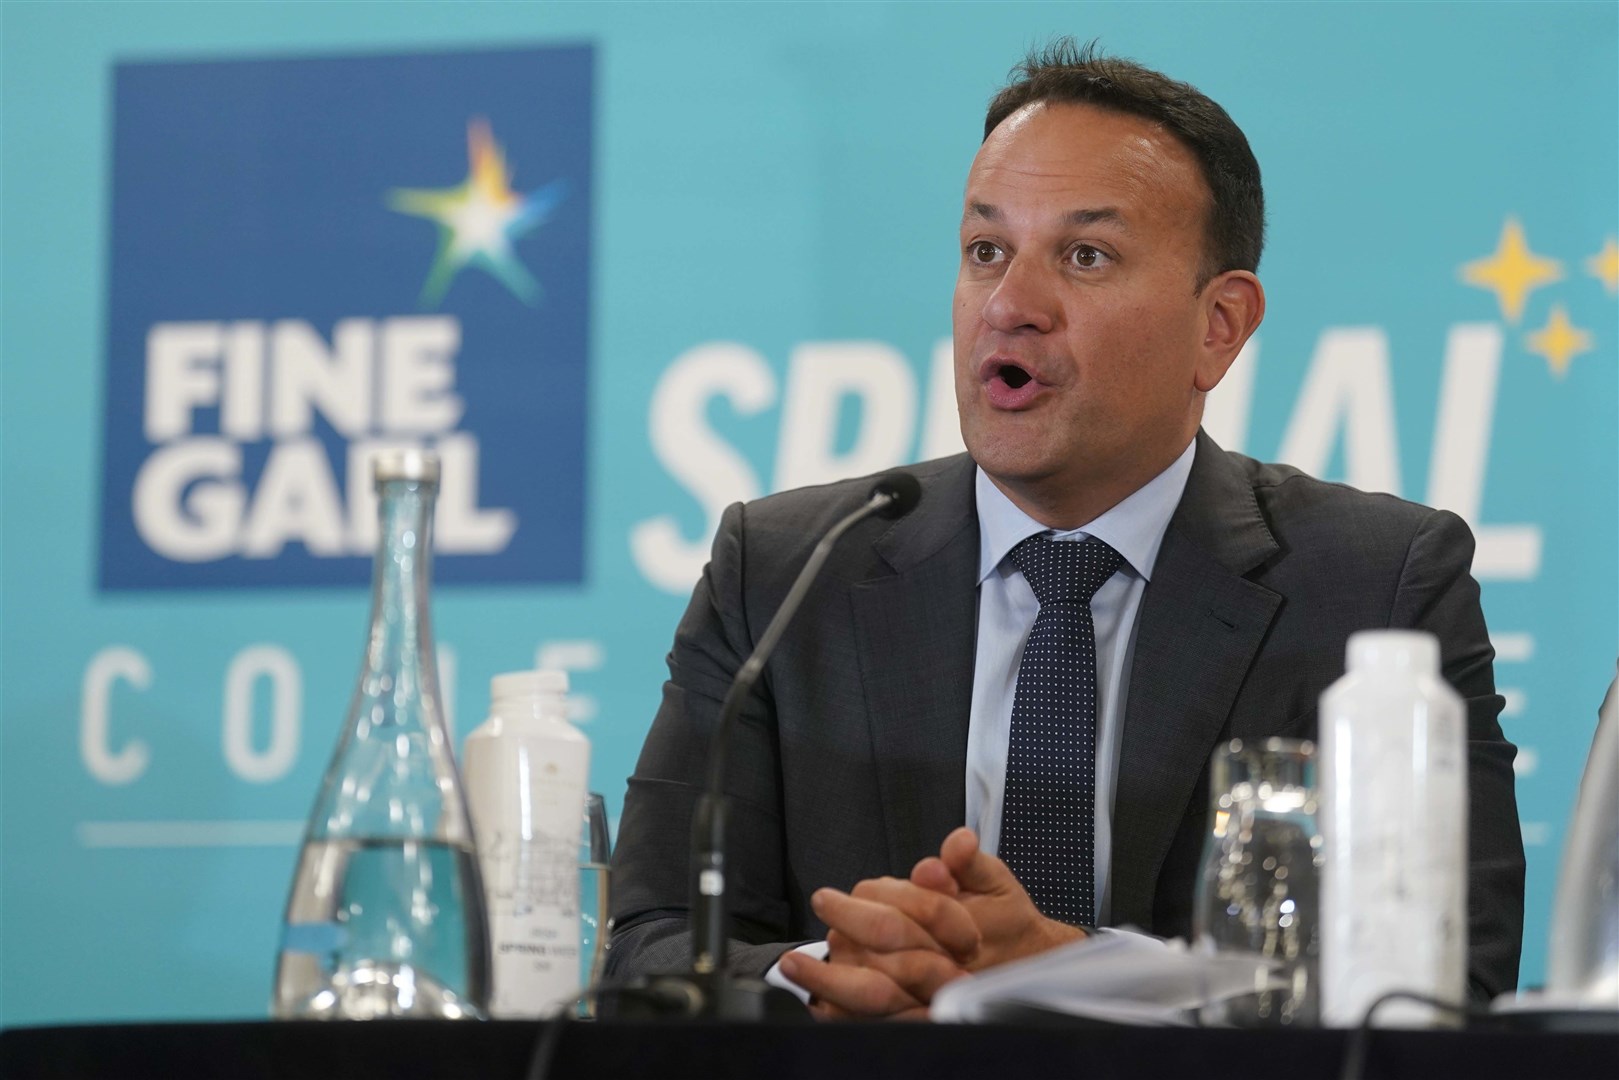 Taoiseach Leo Varadkar during a Fine Gael special conference at the Glenroyal Hotel, Maynooth, Co Kildare (Brian Lawless/PA)